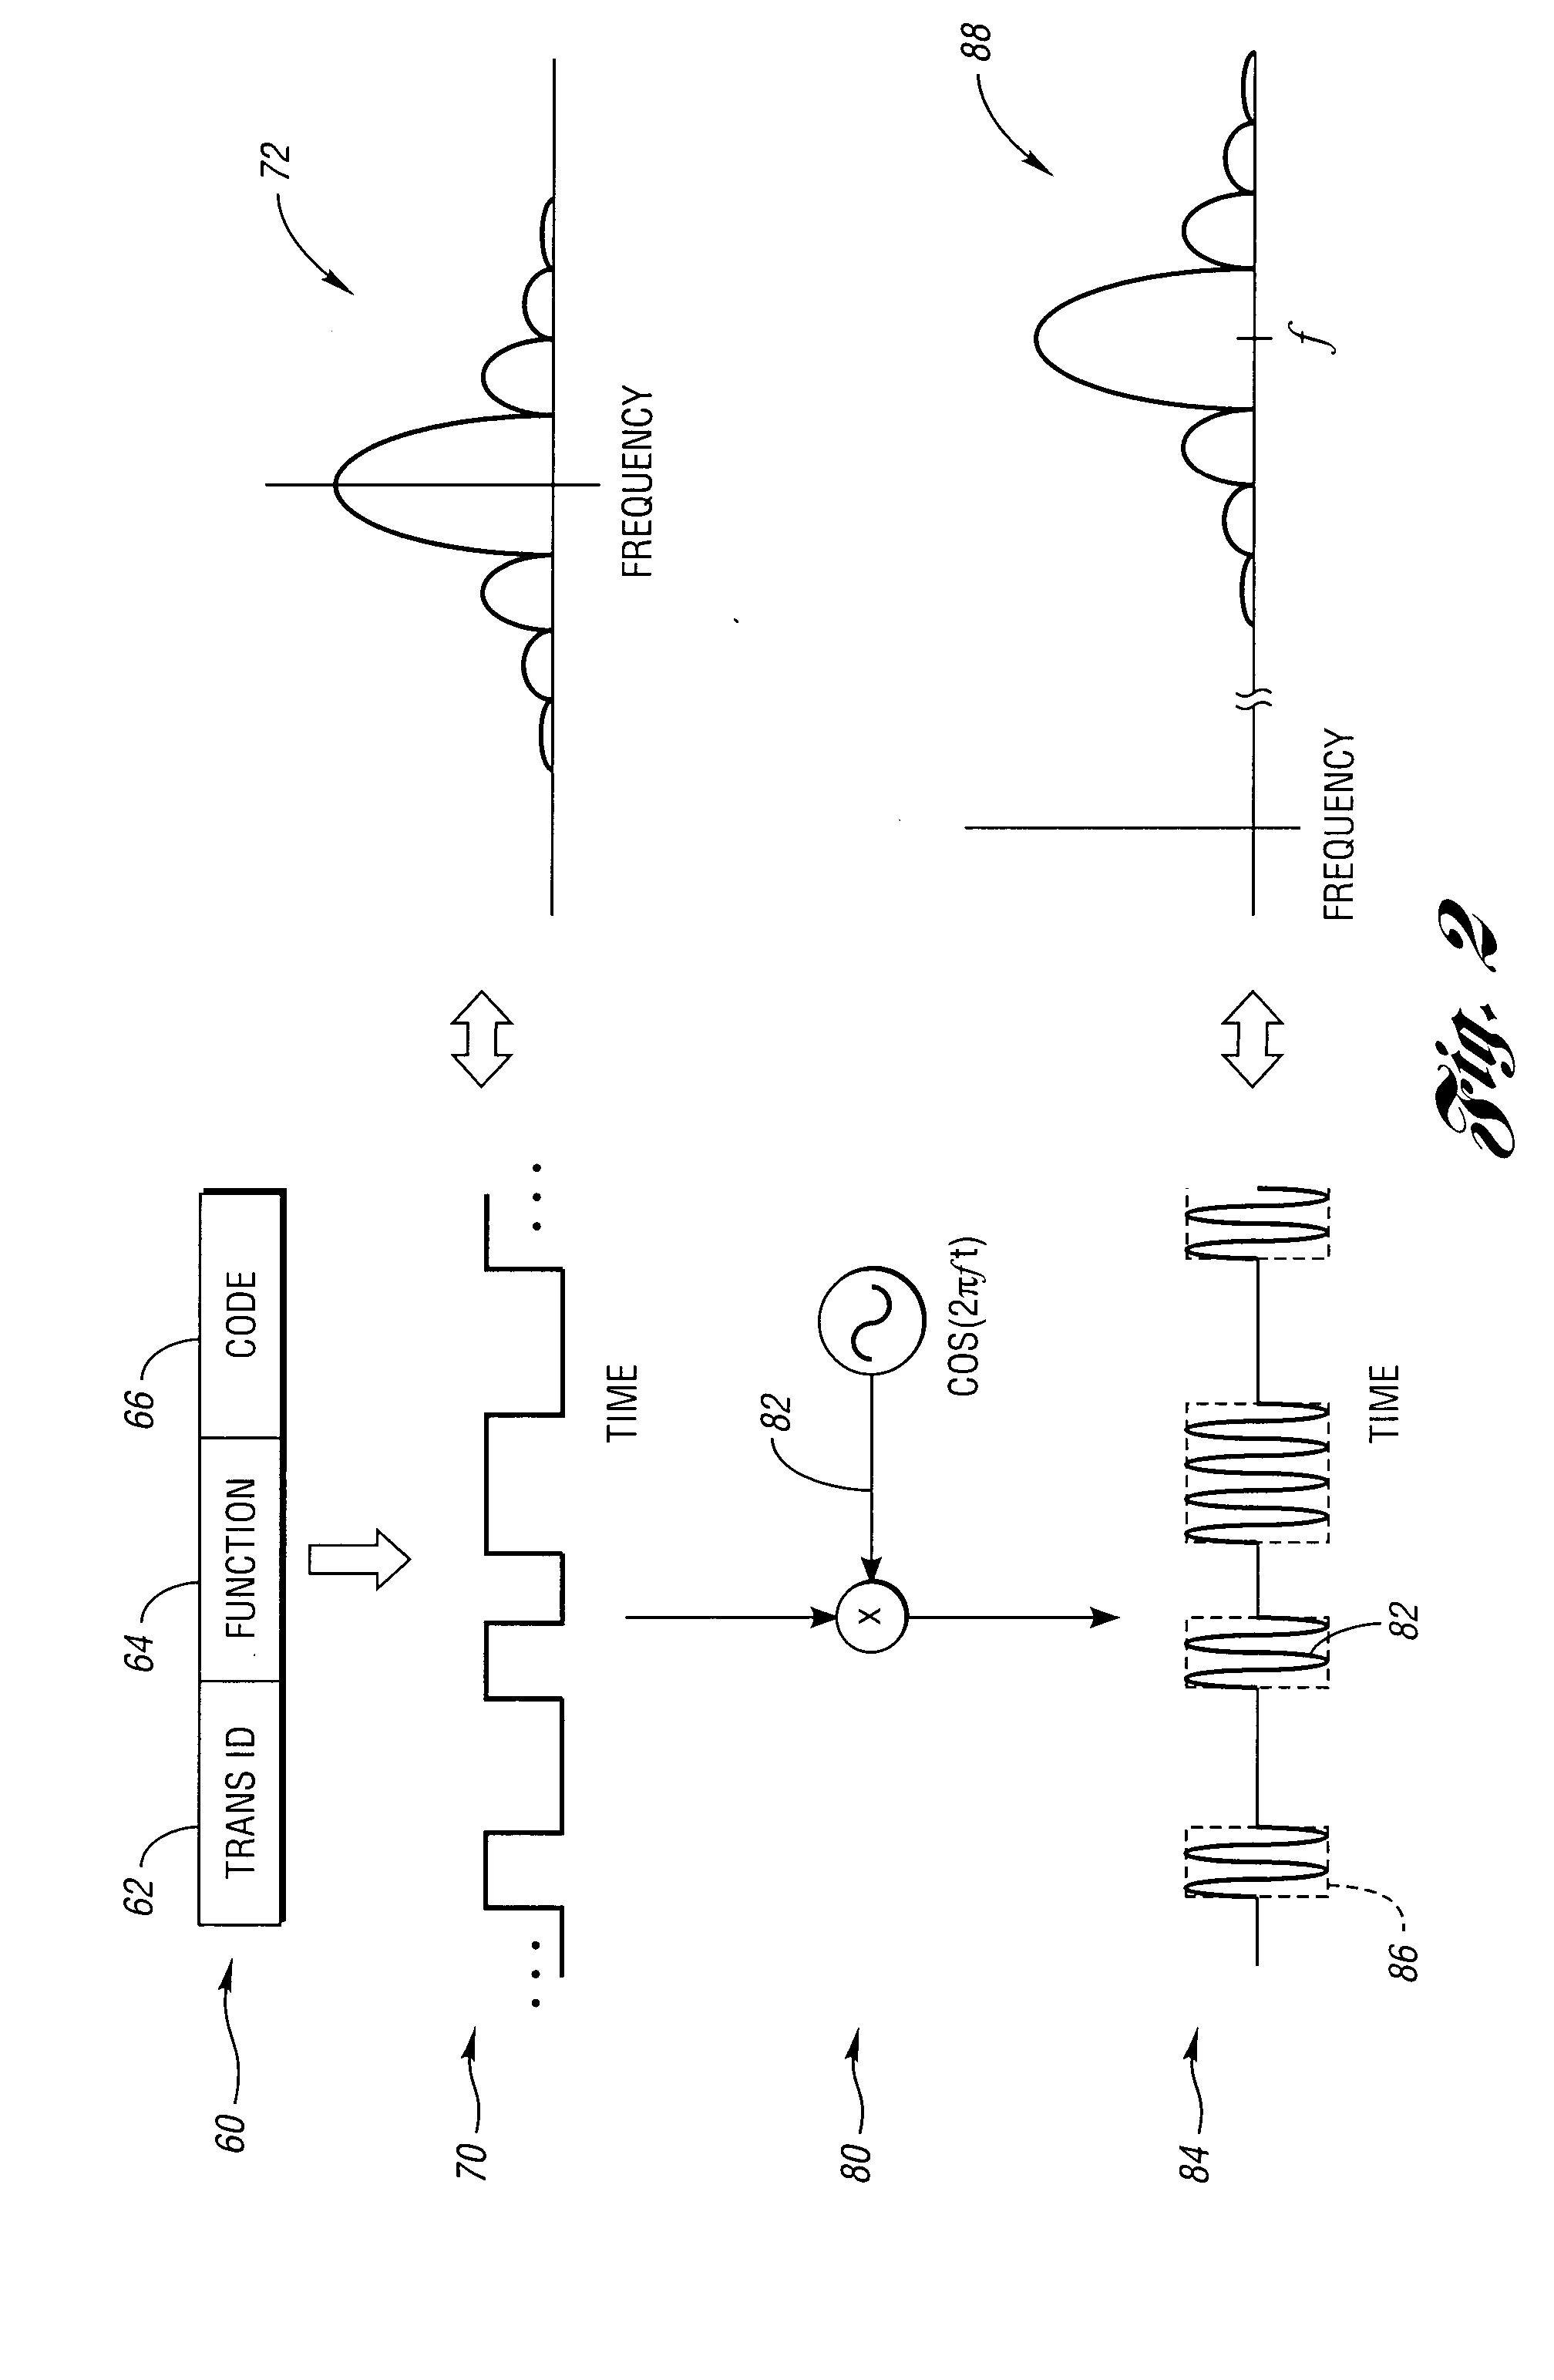 User-assisted programmable appliance control